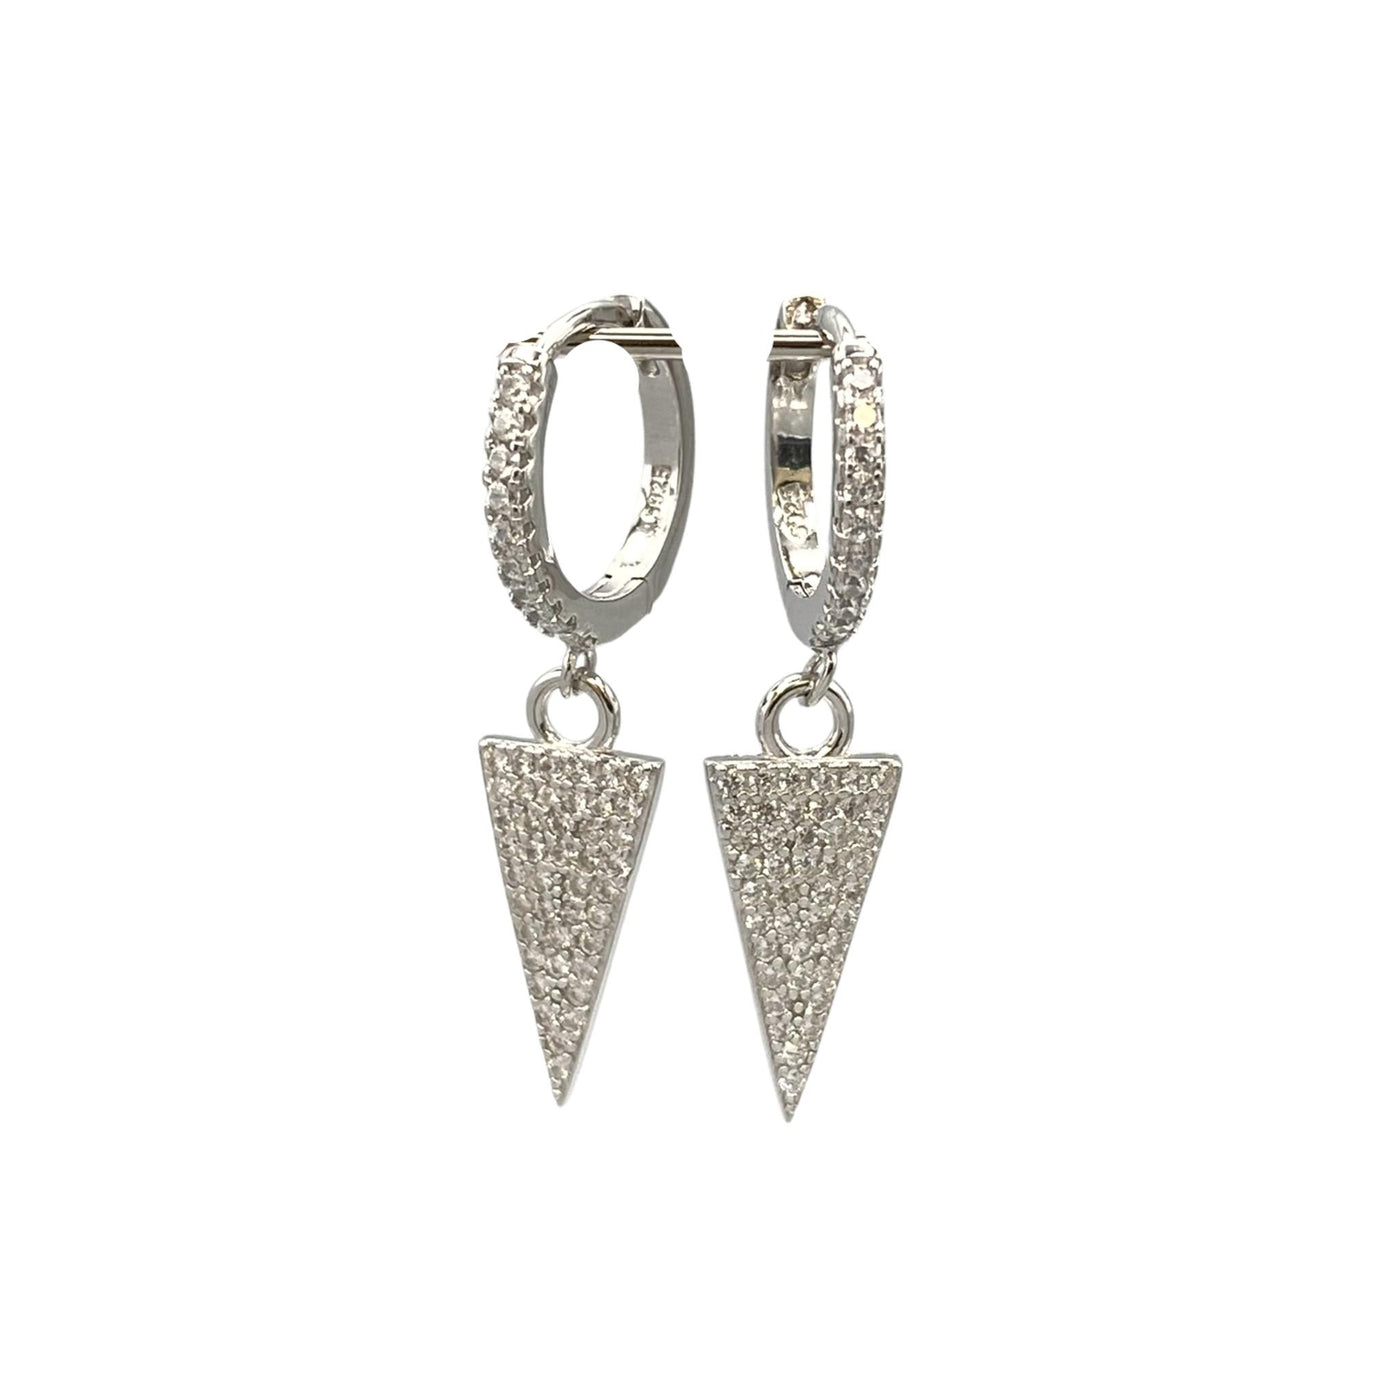 Silver hoop earrings with triangle charms - 14.40 mm